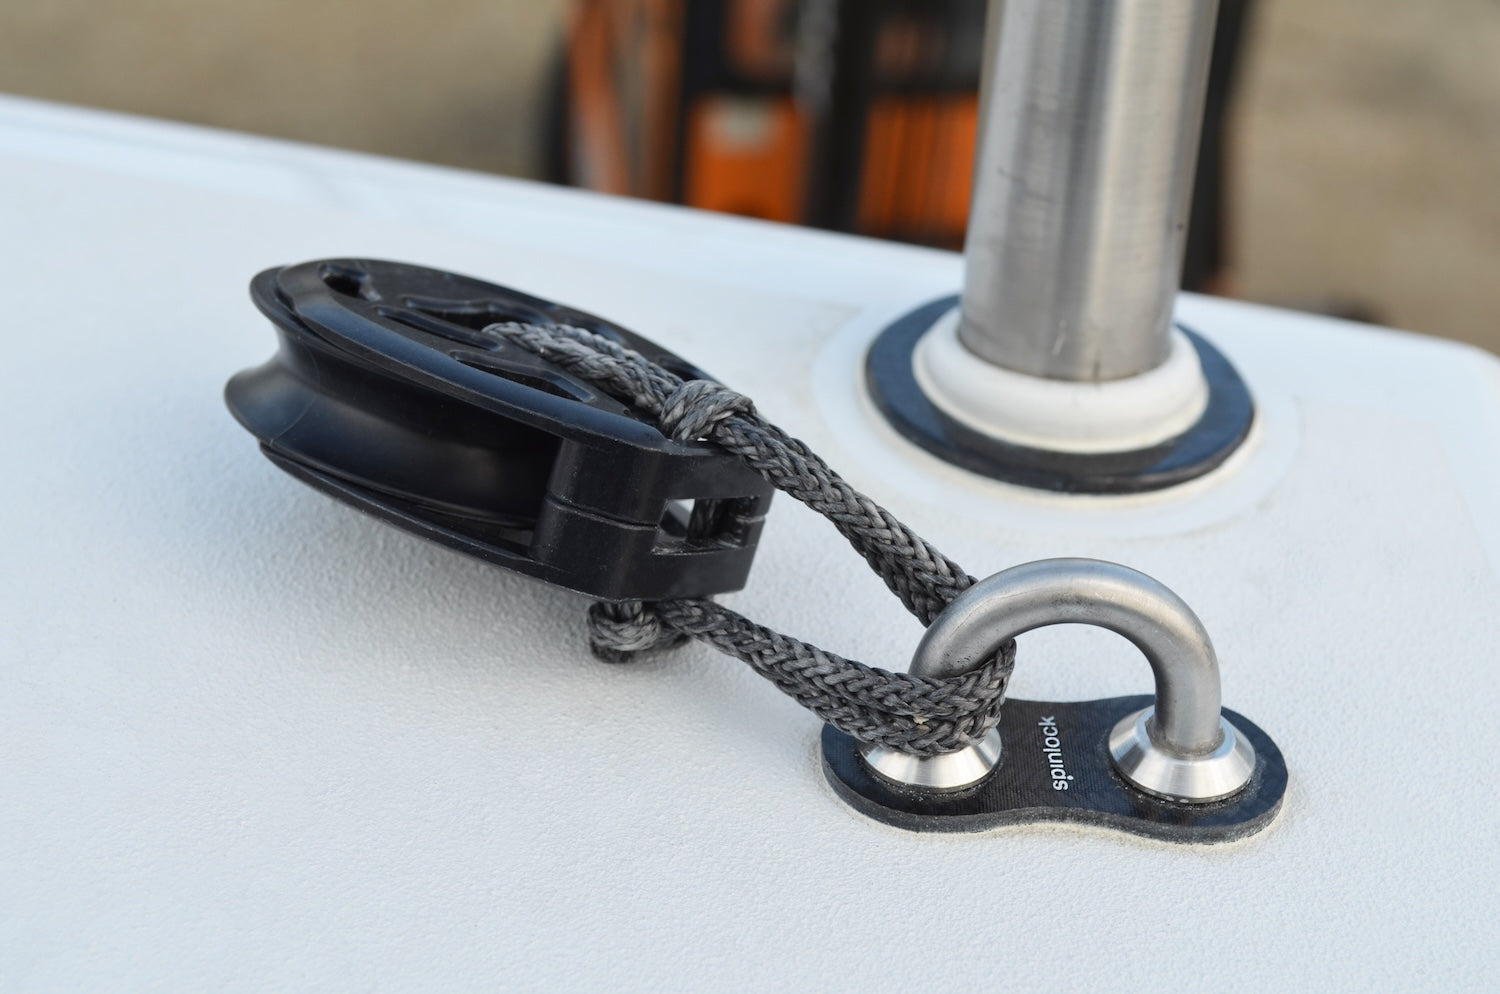 Spinlock High-Strength Padeye 12mm In 17-4PH with Carbon Plates | SendIt Sailing